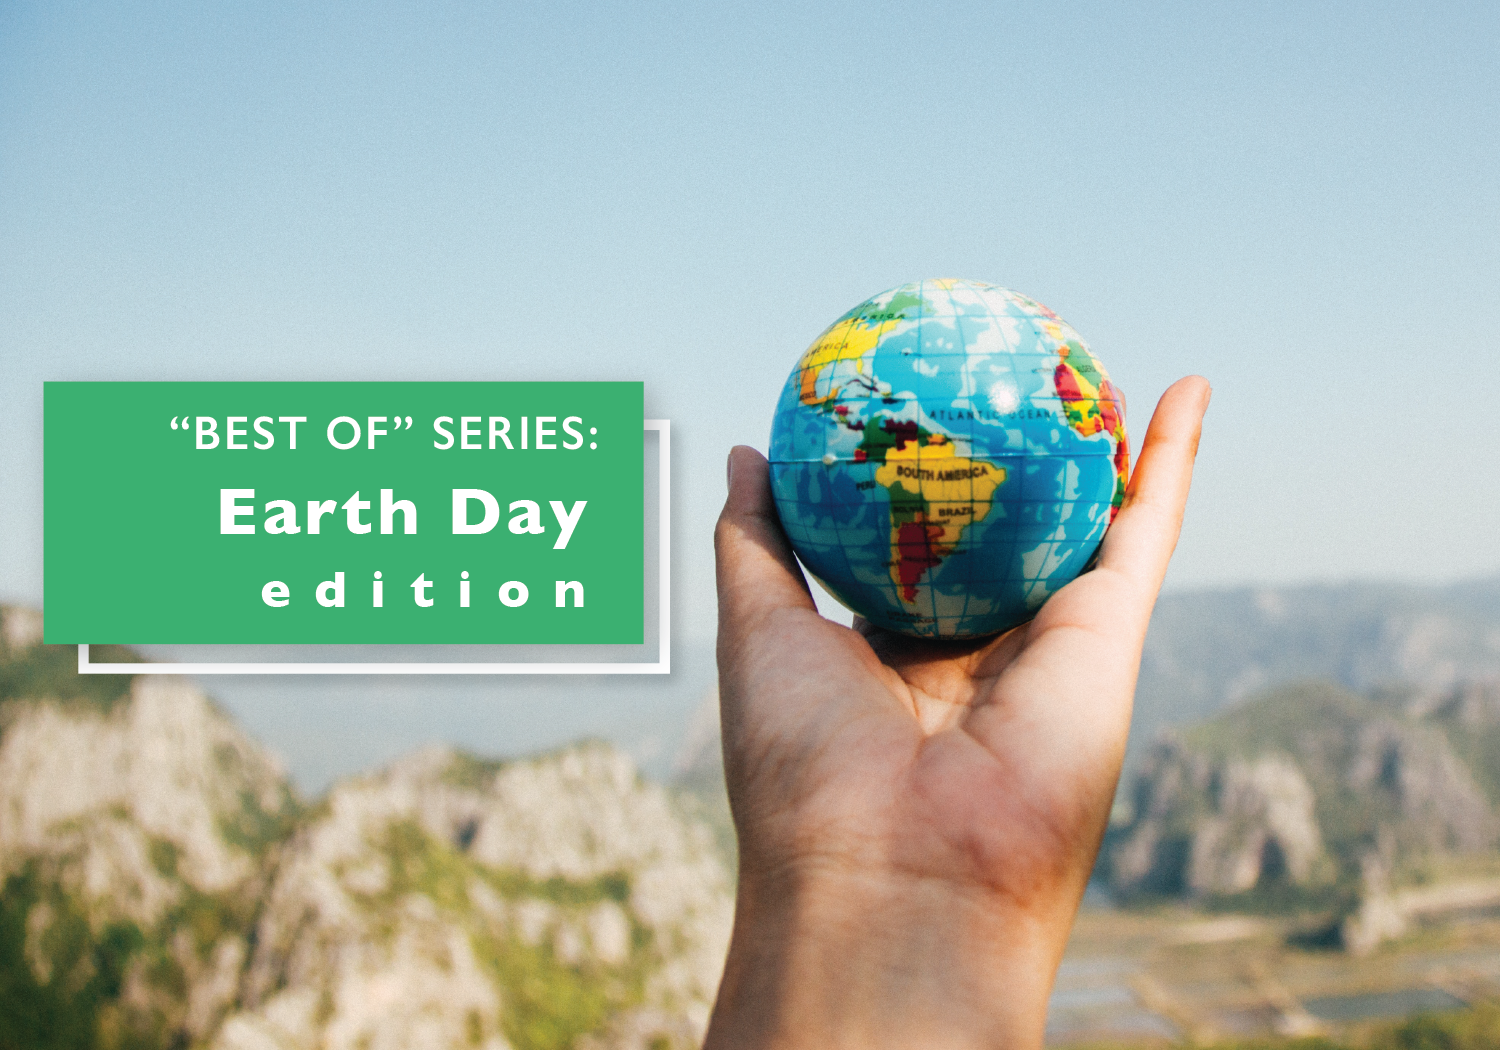 Best of Series – Top Earth Day Events to Attend